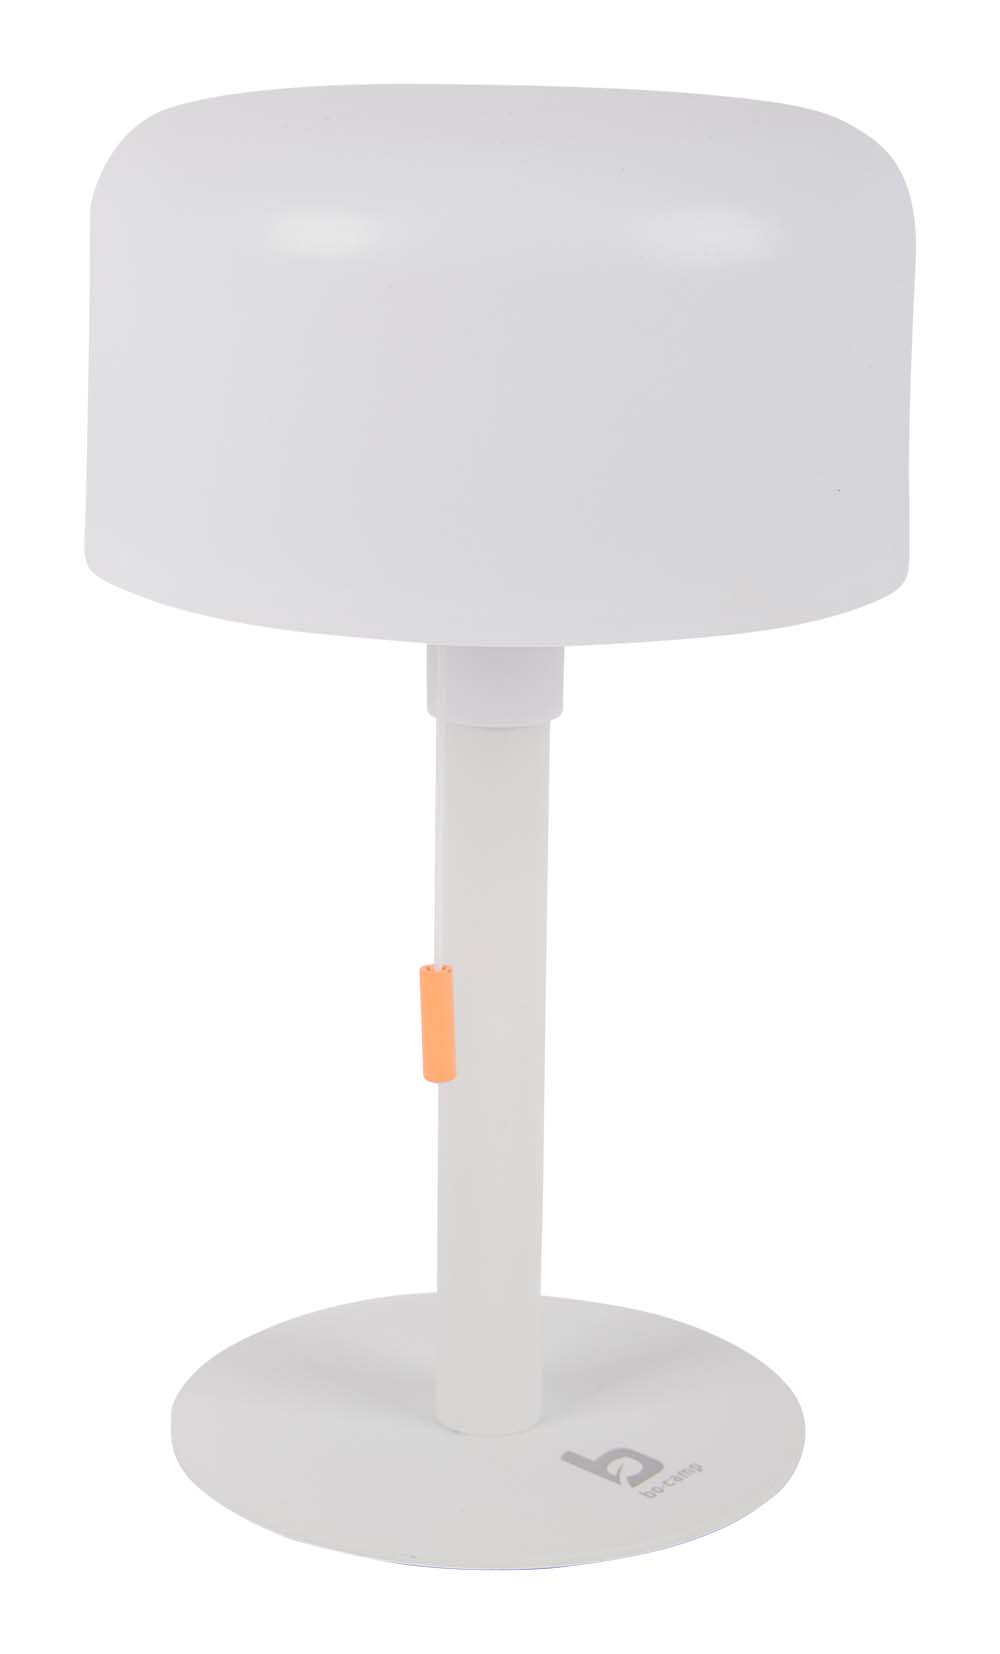 5818619 An atmospheric rechargeable table lamp fromt the Pastel collection. Gives a pleasant light by the warm white LED lighting. Equipped with 3 light modes (25/50/100%). The built-in Li-ion battery can be charged with an included USB cable. Ideal for on a table or cabinet.